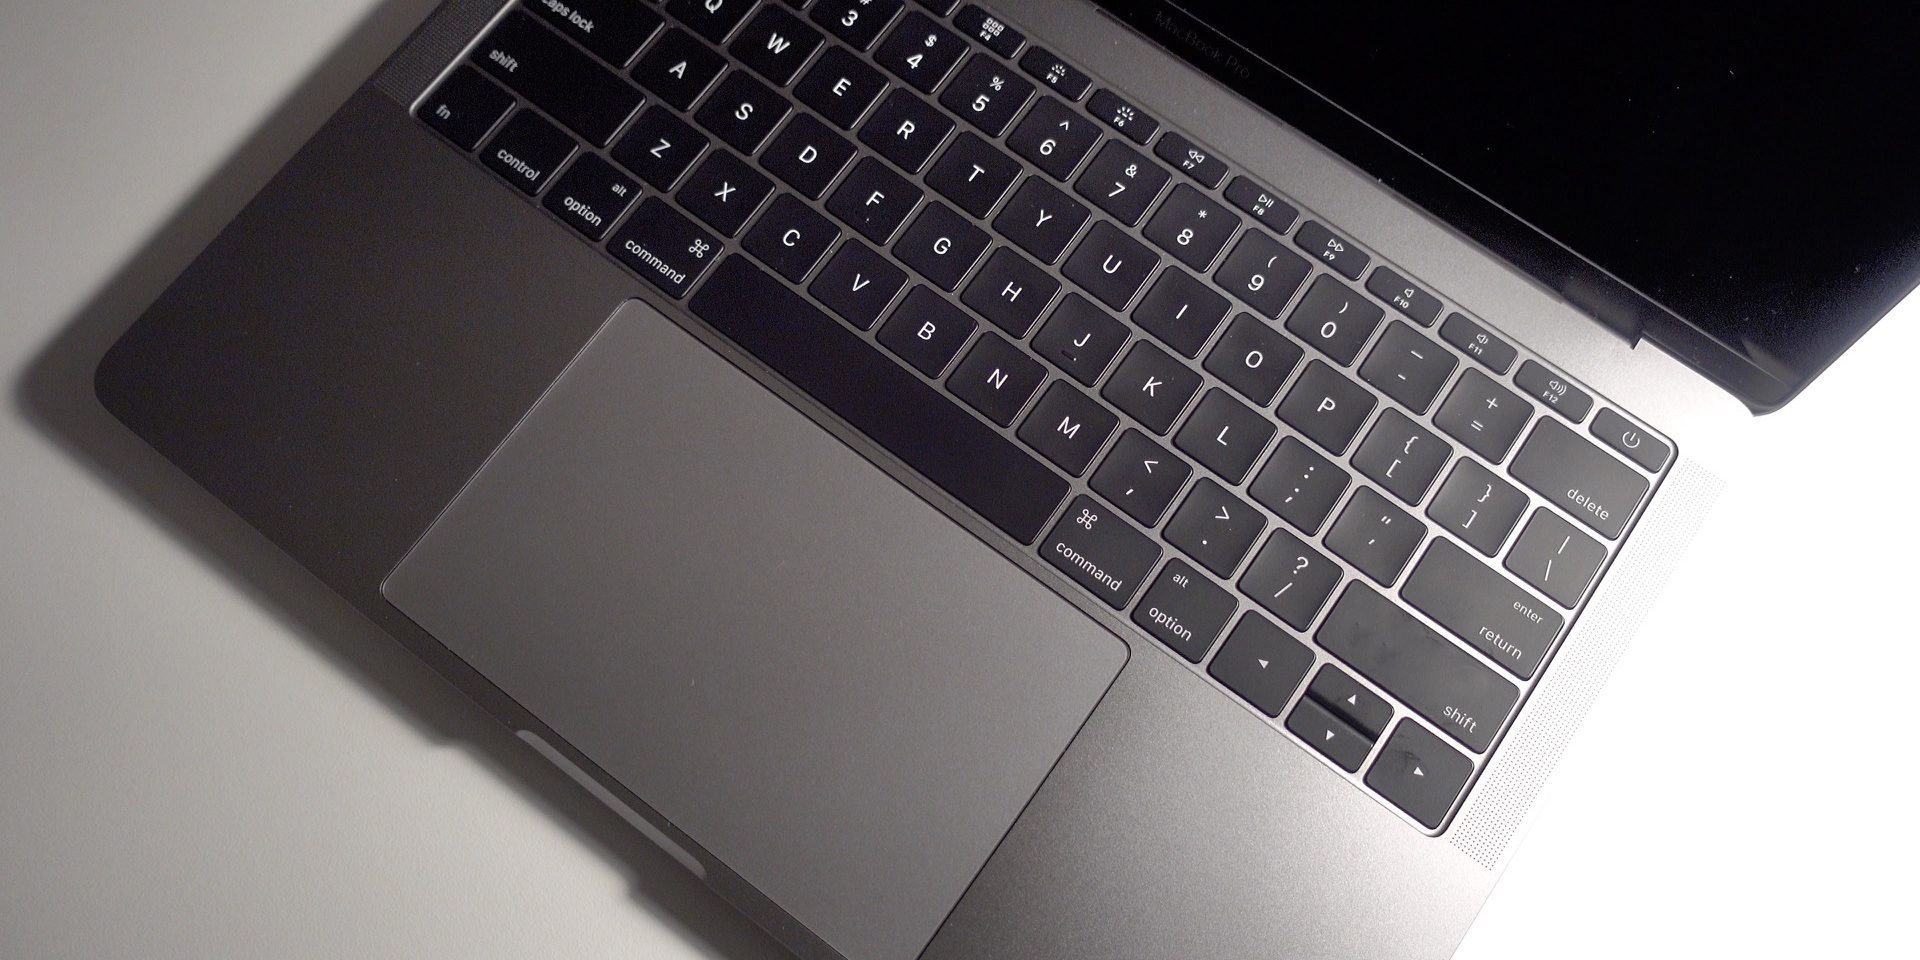 Apple Offering Battery Replacement Program for some 13-inch MacBook Pros